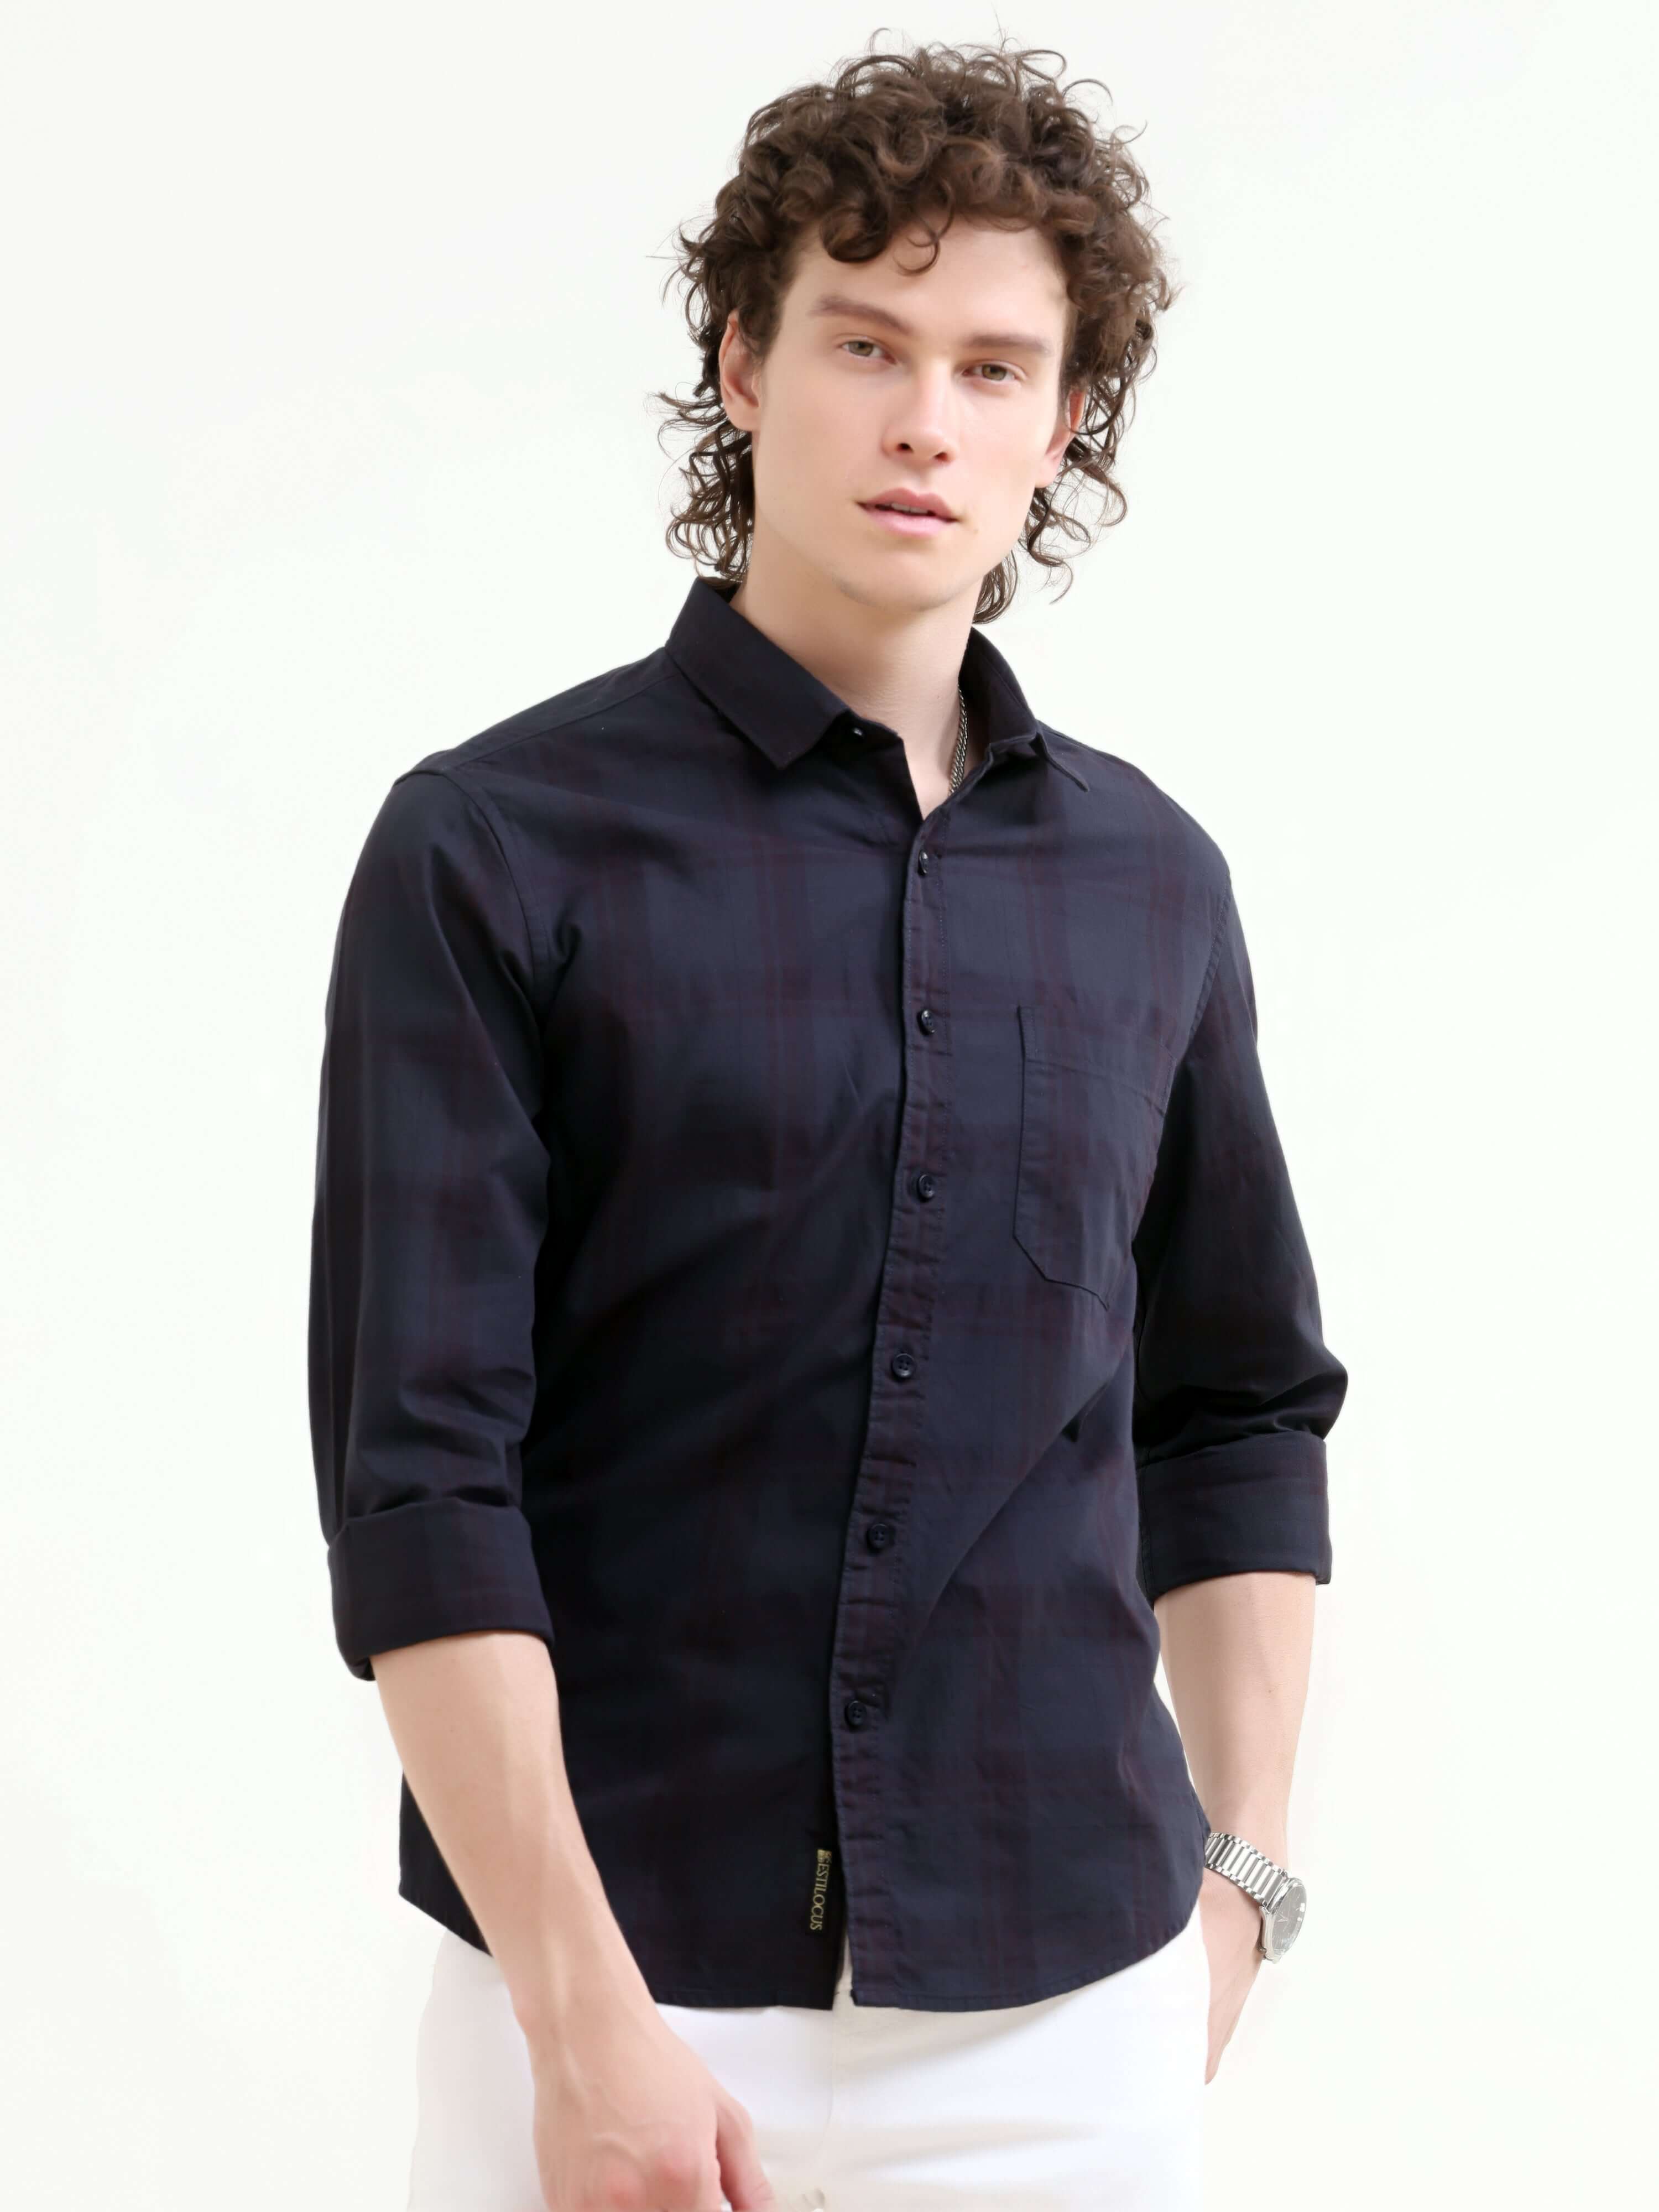 Missy's Navy Classic Plaid Shirt - Men's Summer Essential shop online at Estilocus. Elevate your style with Missy's navy plaid shirt, a must-have for men this summer. Ideal for any occasion, shop the new arrival now!